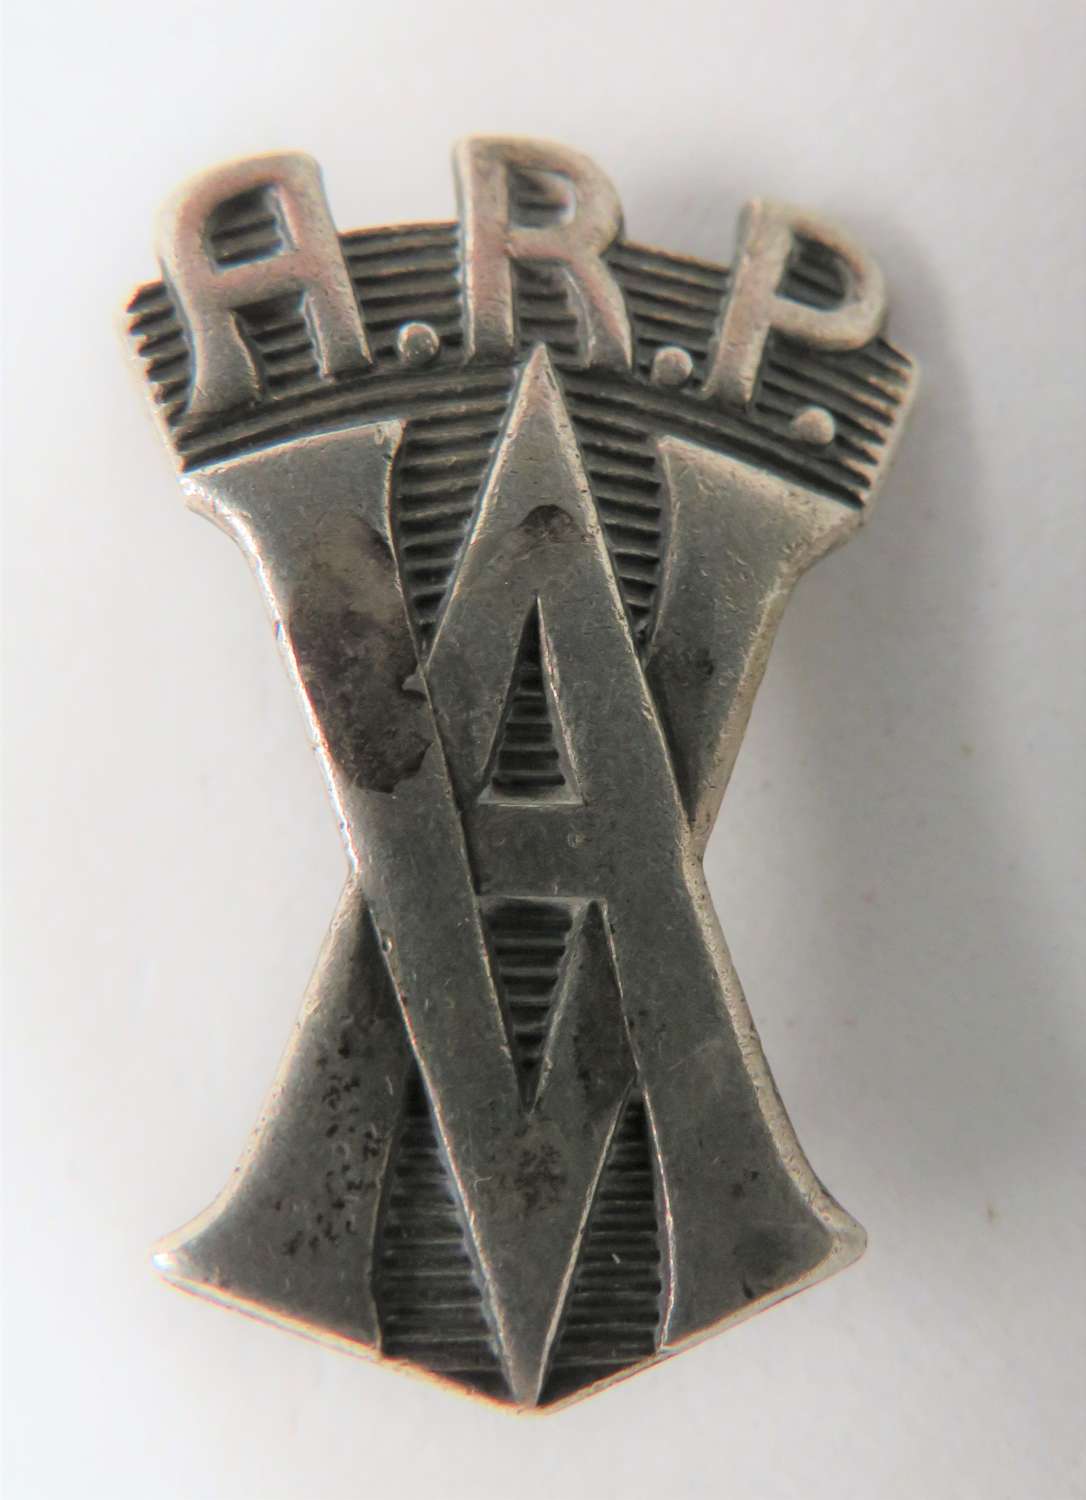 Vickers Armstrong A.R.P Silver Lapel Badge